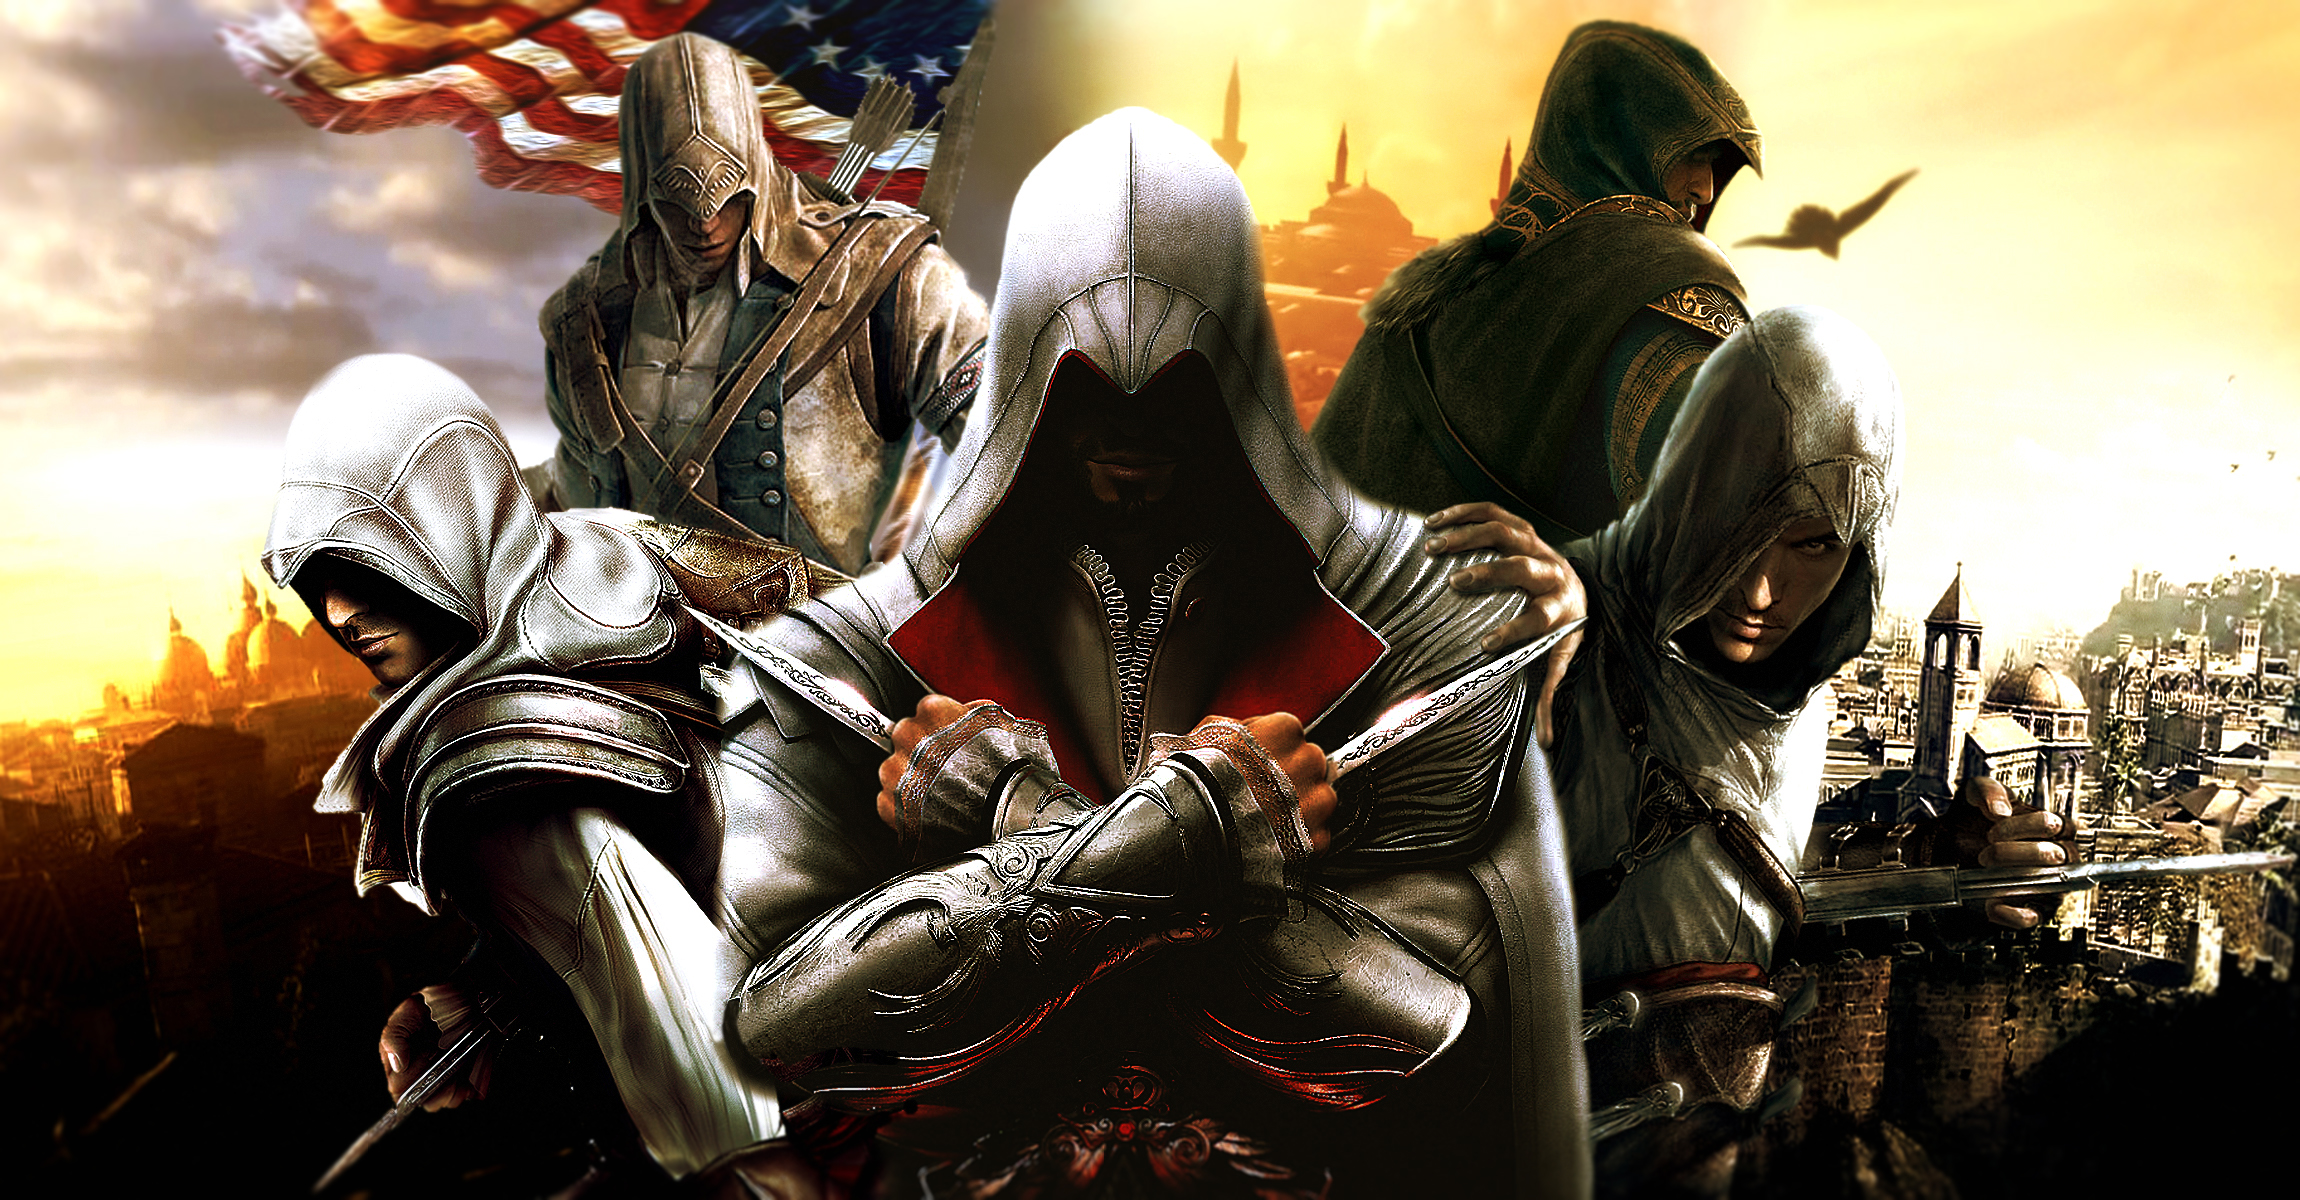 41 Ezio (Assassin's Creed) HD Wallpapers | Backgrounds - Wallpaper